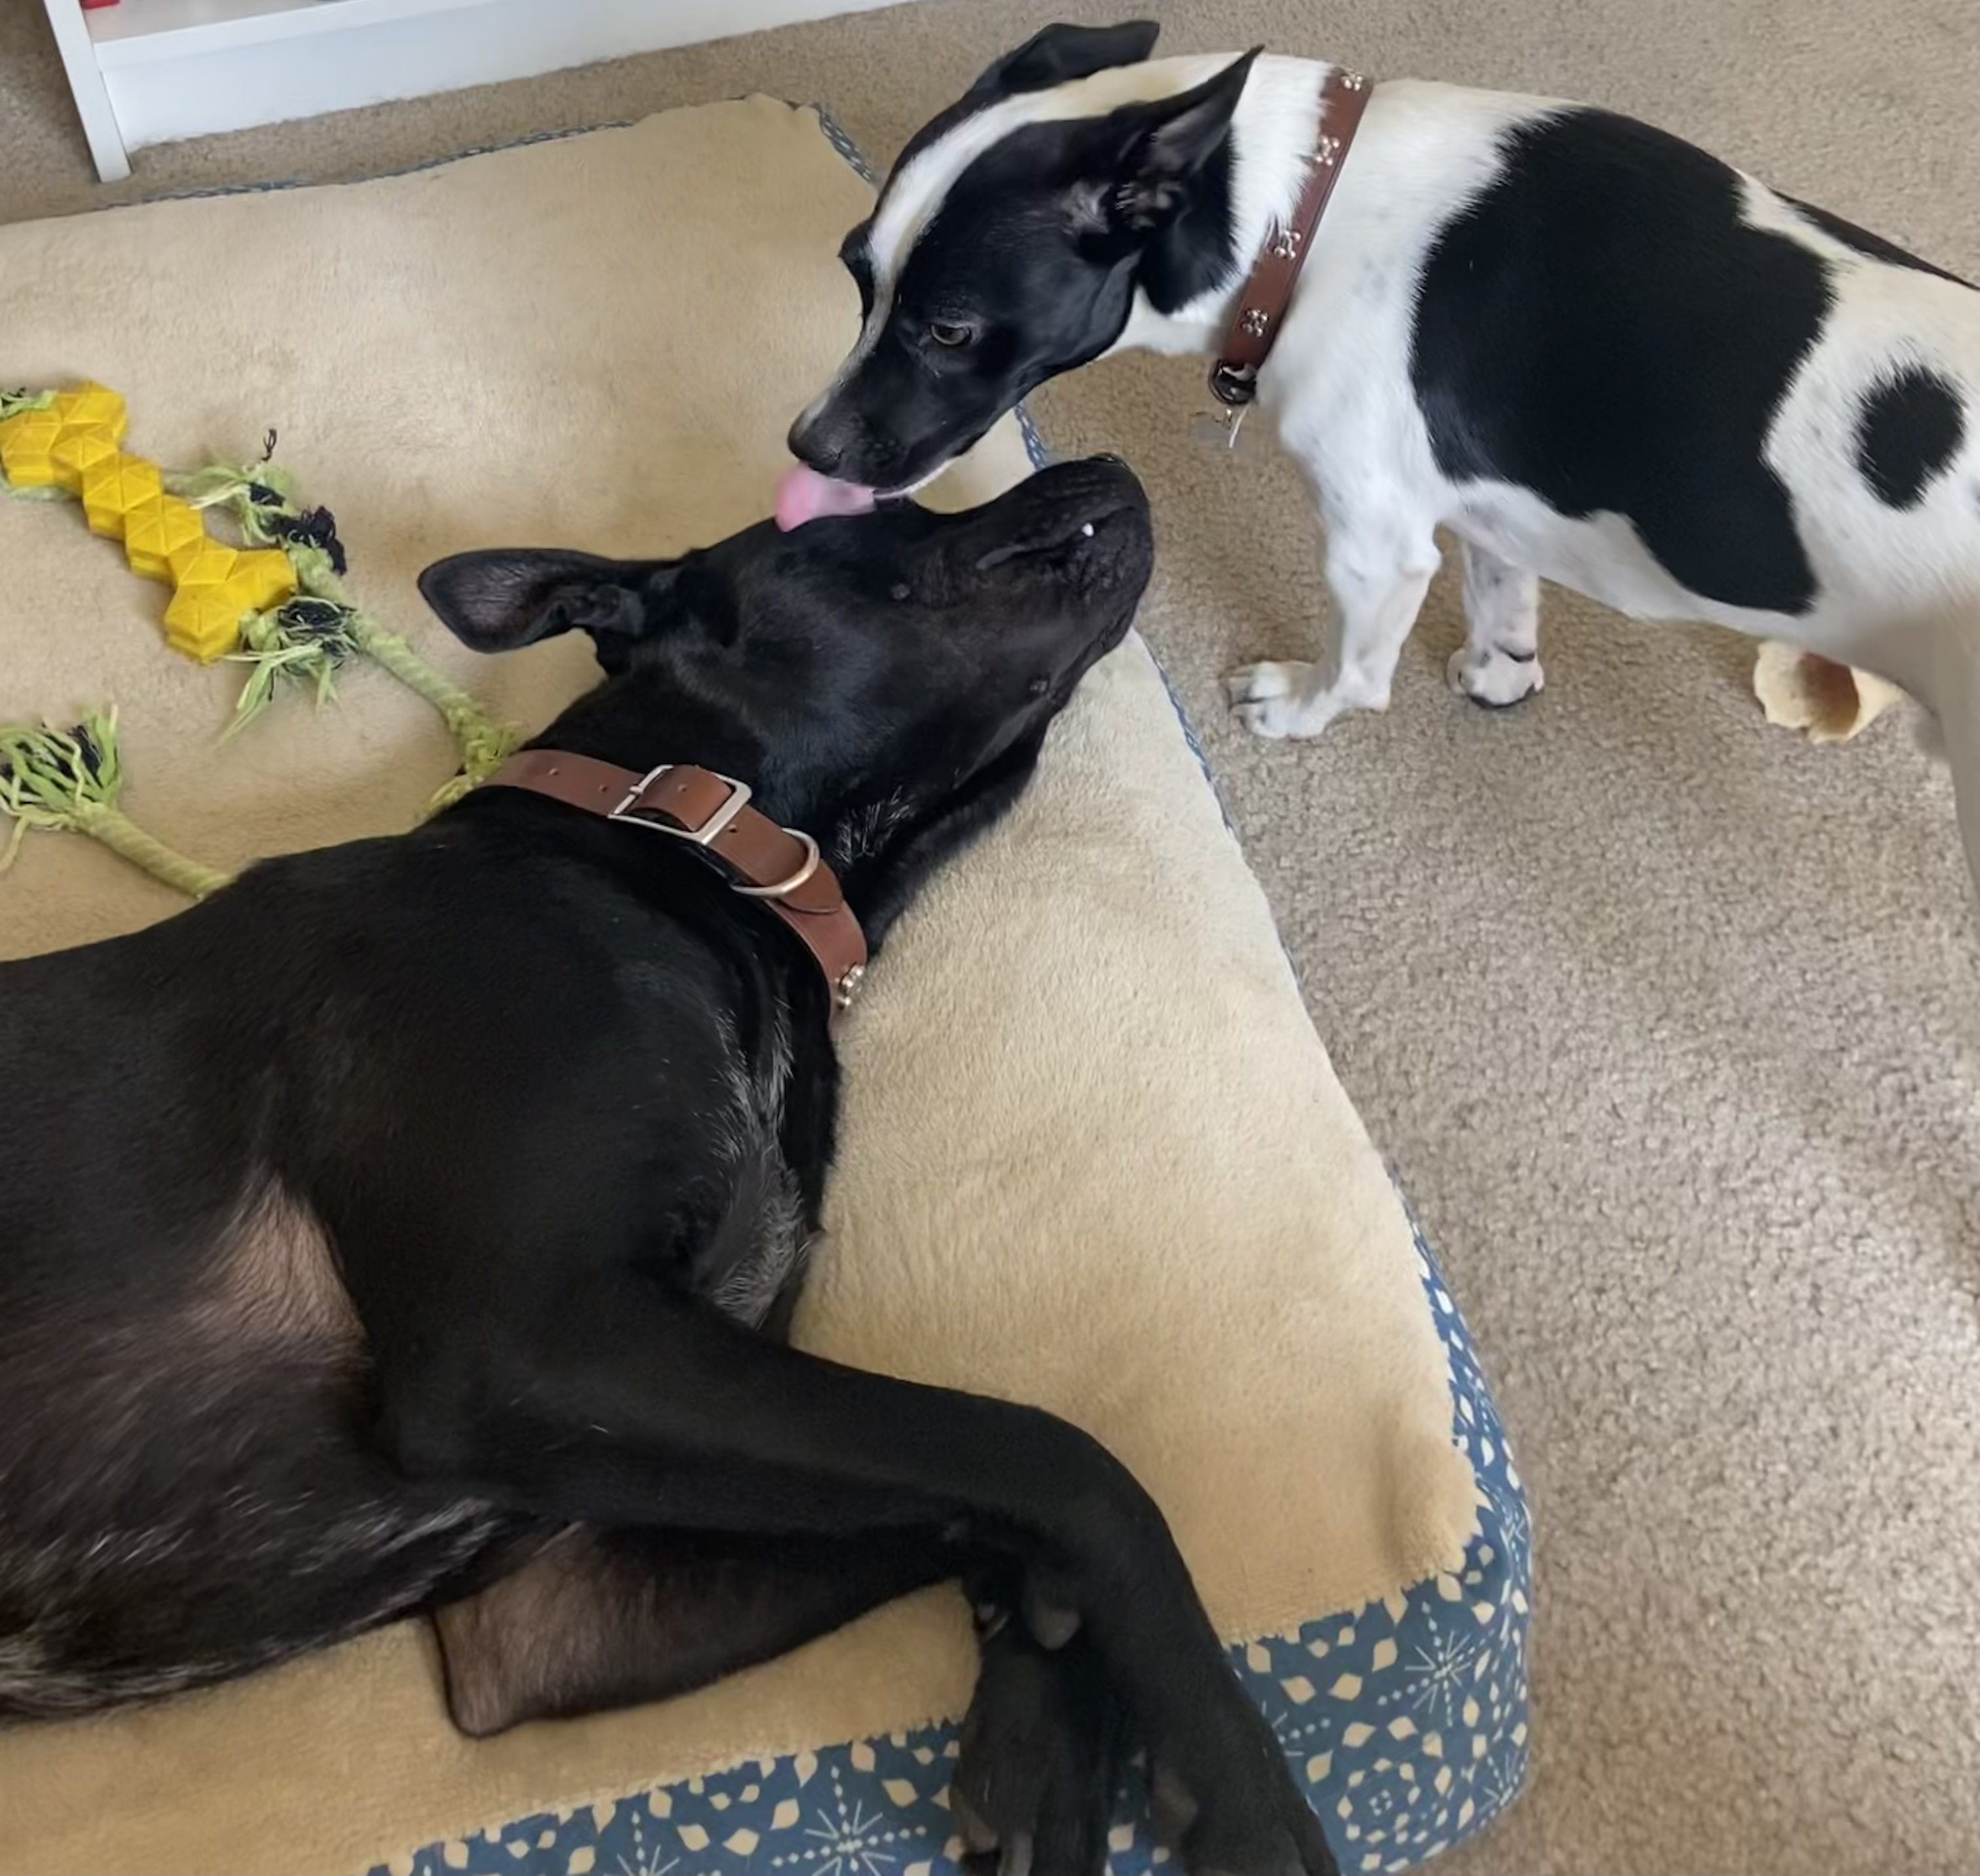 Two dogs, one larger and one medium sized, the medium-sized dog is licking the large dog